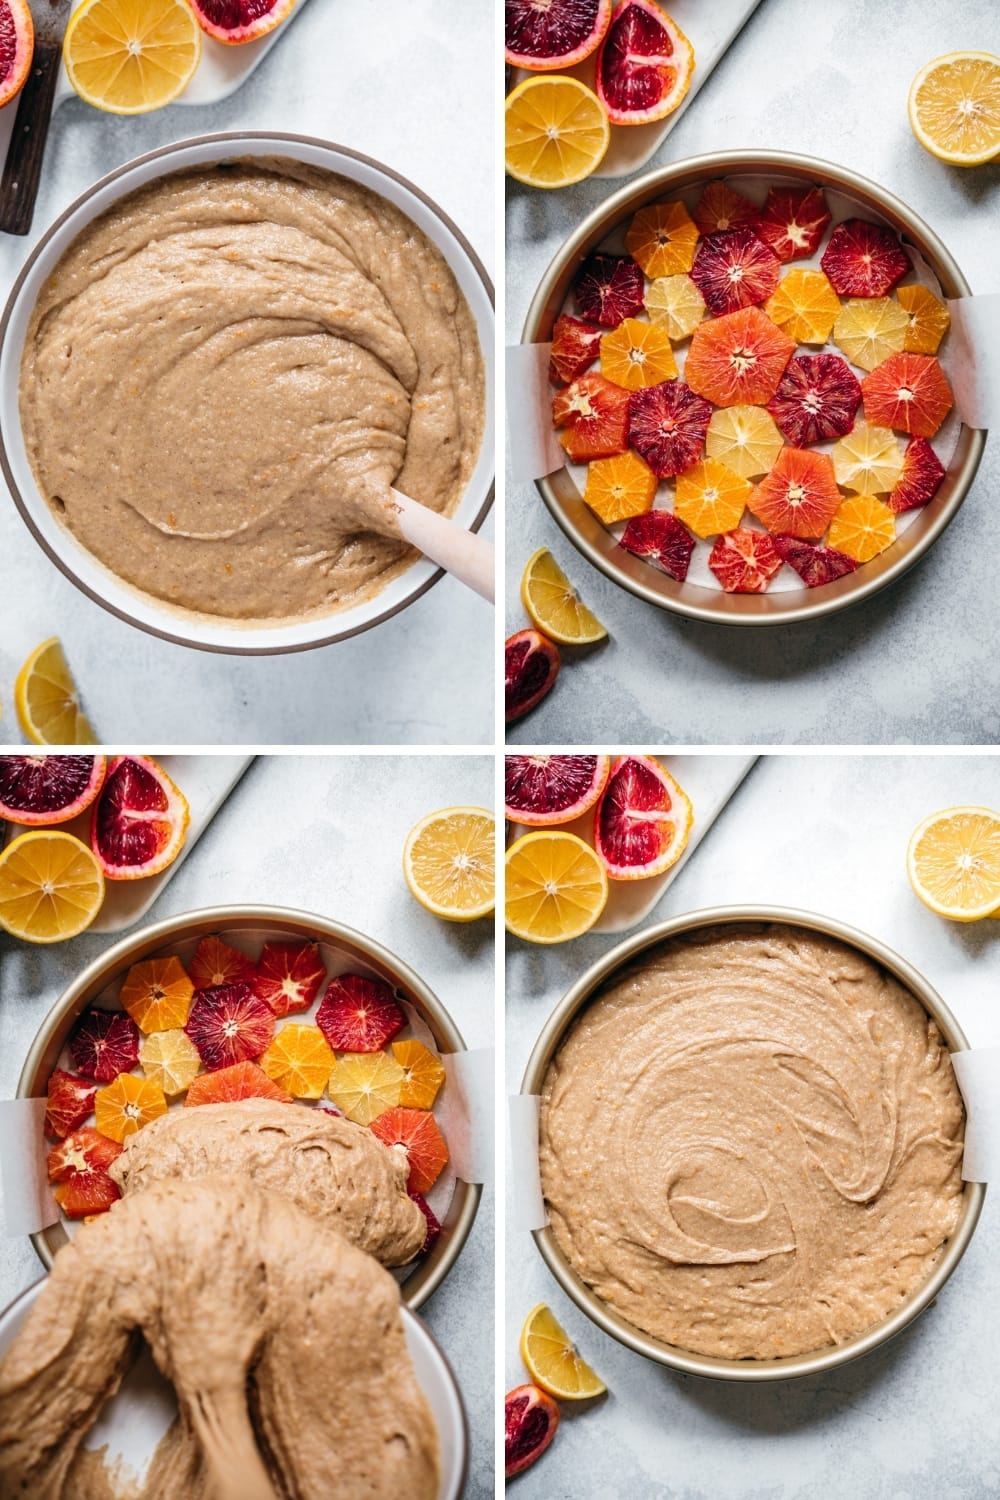 step-by-step photos of making batter for orange olive oil cake and pouring into cake pan.